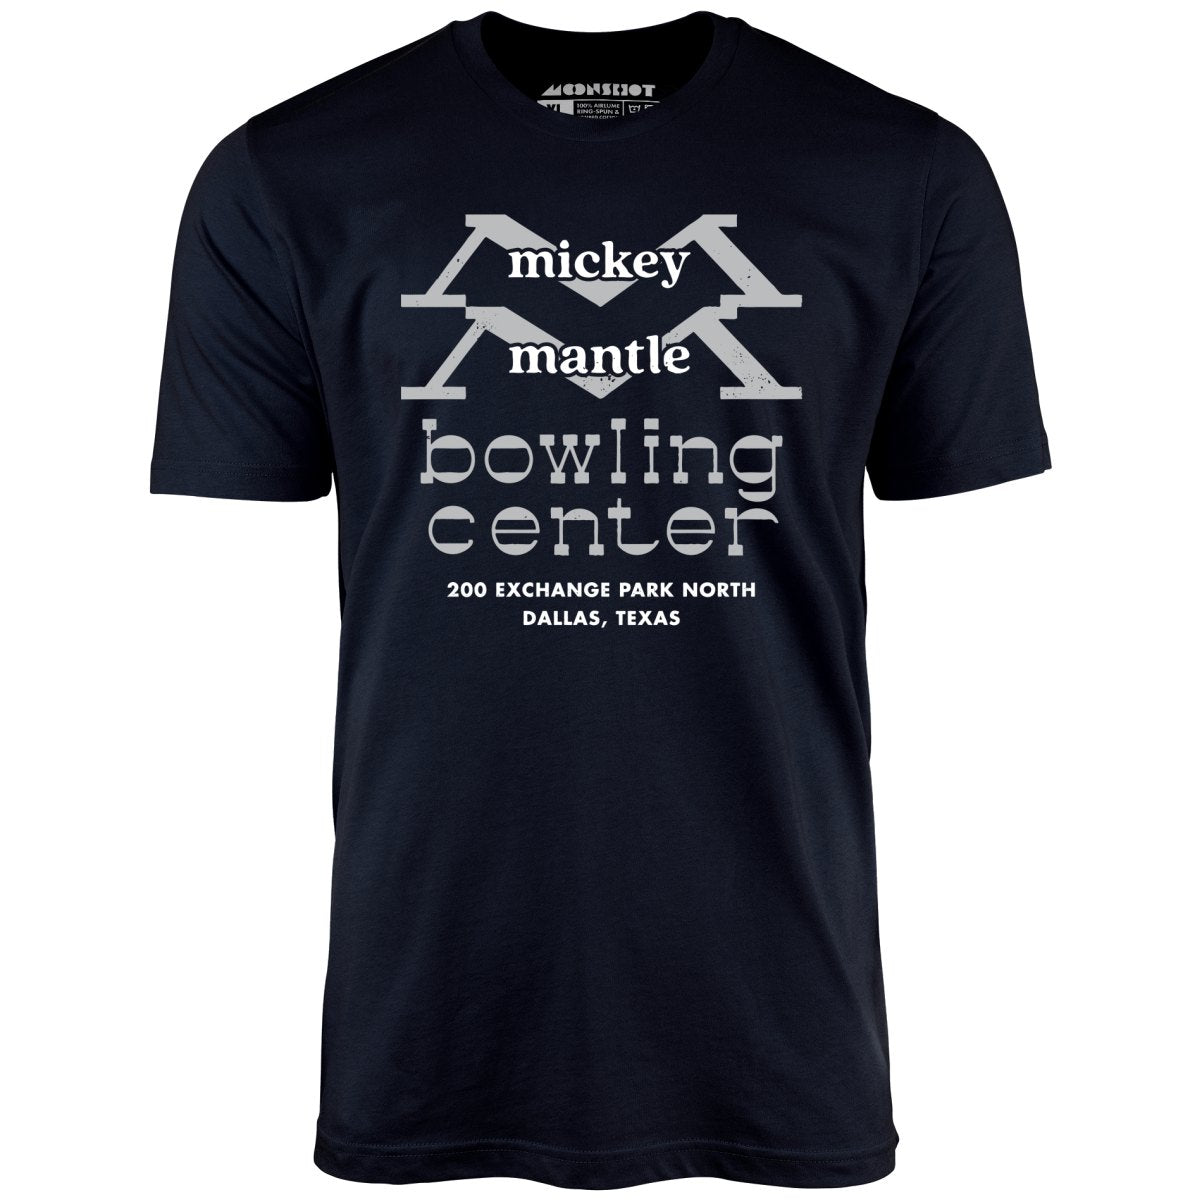 Mickey Mantle Bowling Center - Dallas, TX - Vintage Bowling Alley - Unisex T-Shirt